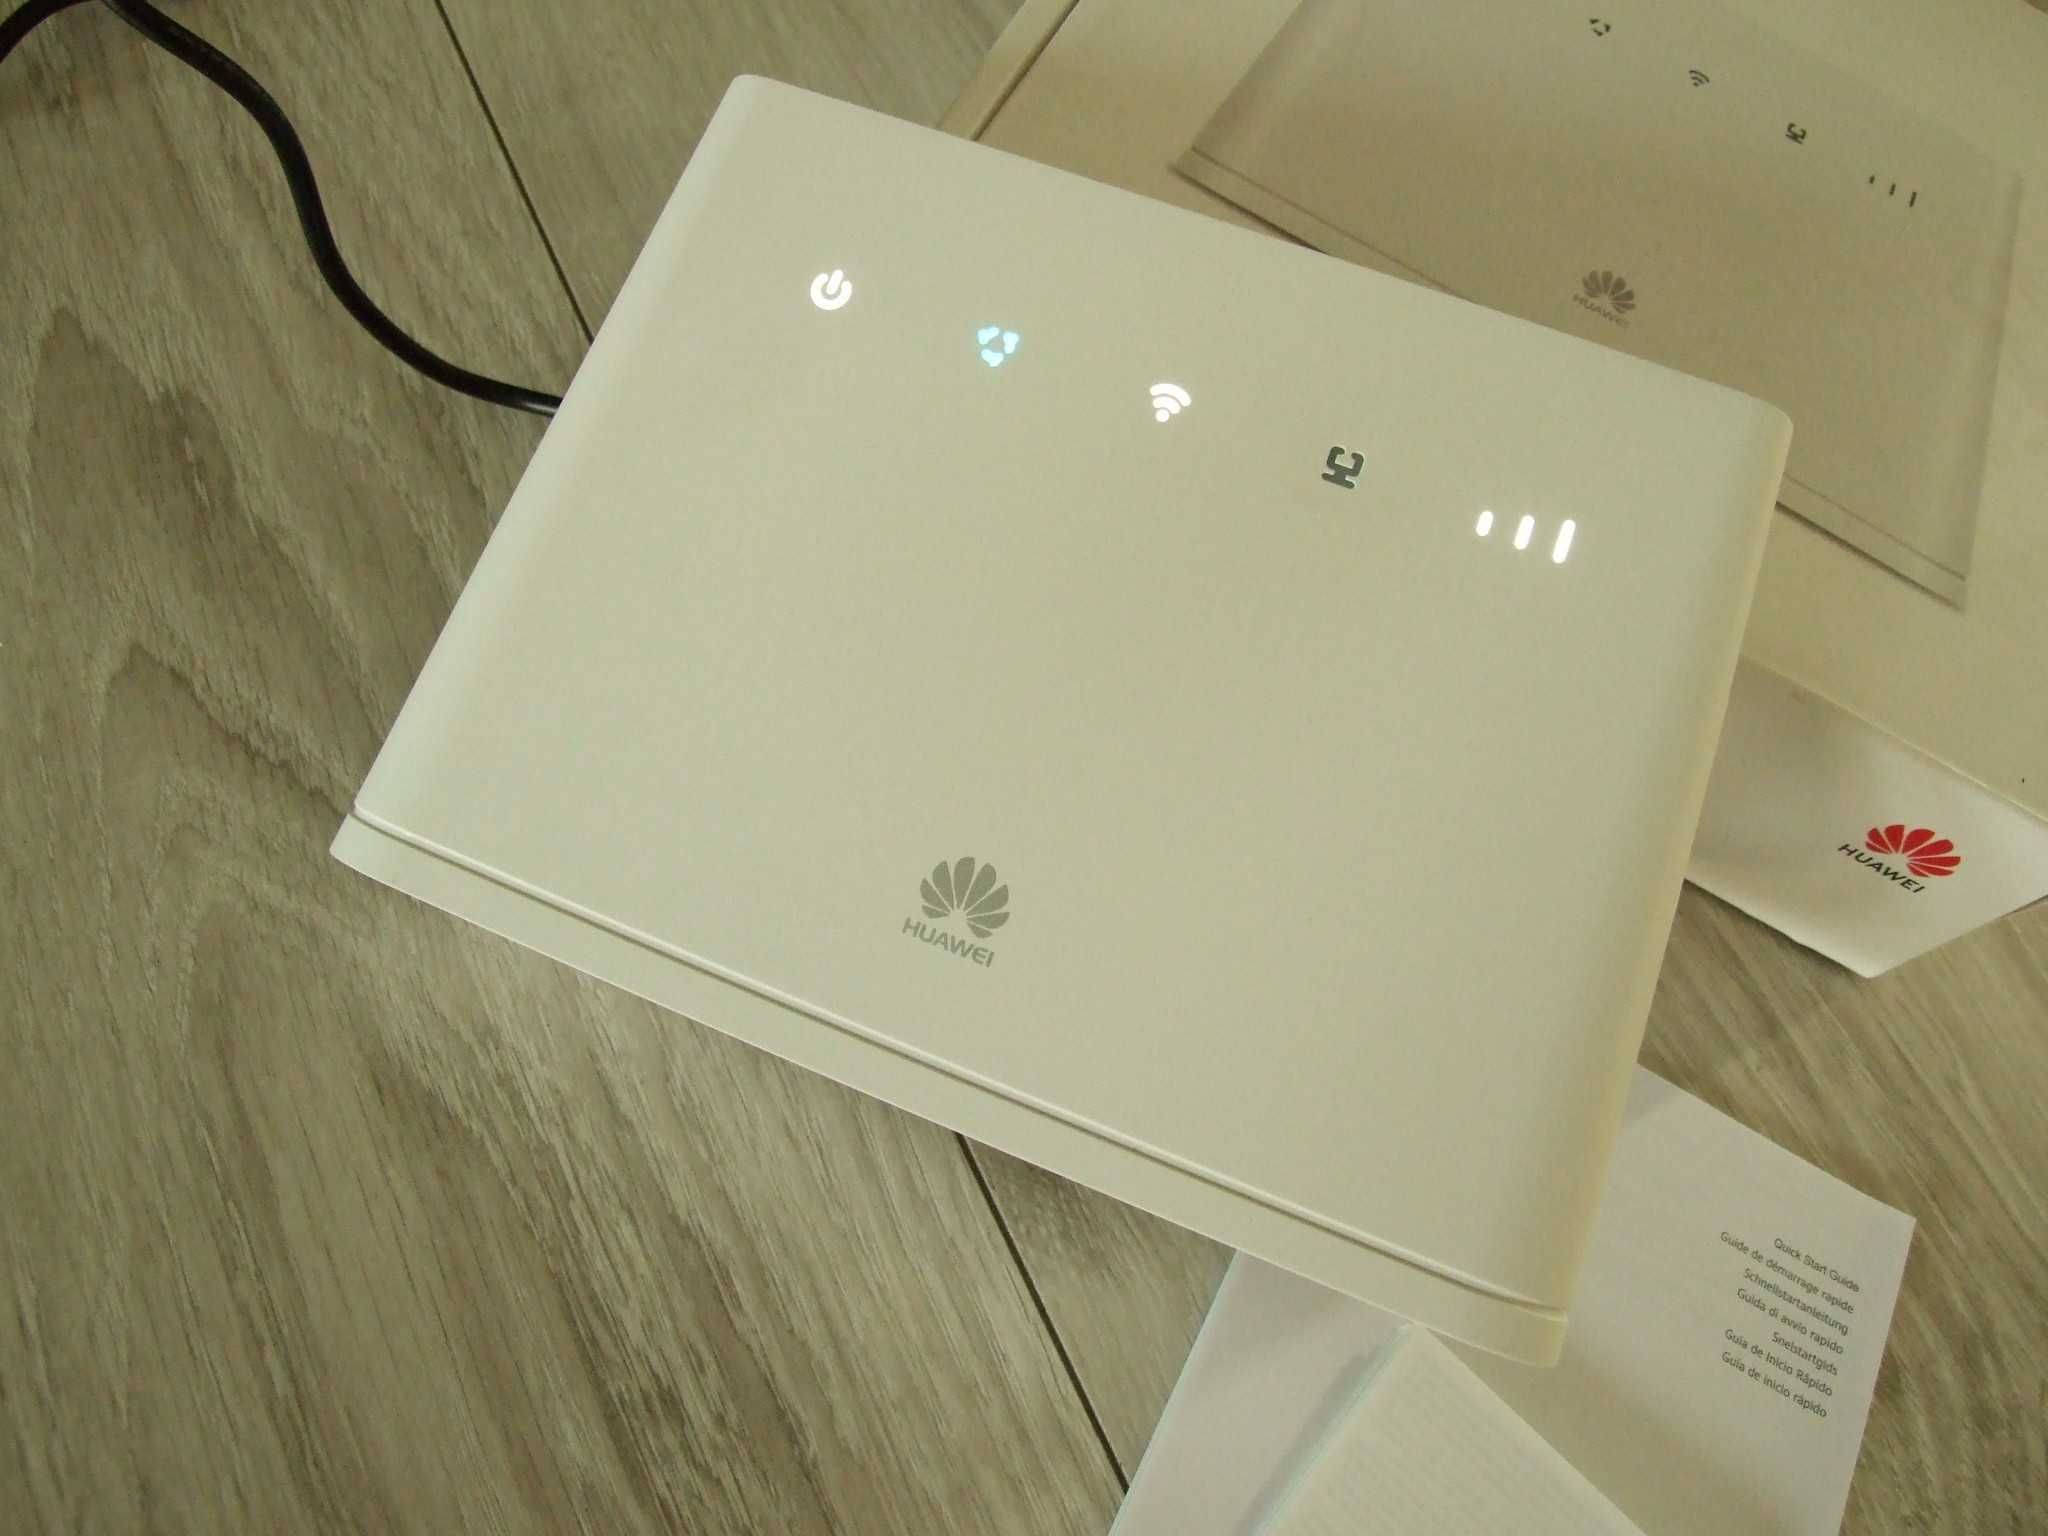 Huawei B311-221 router LTE